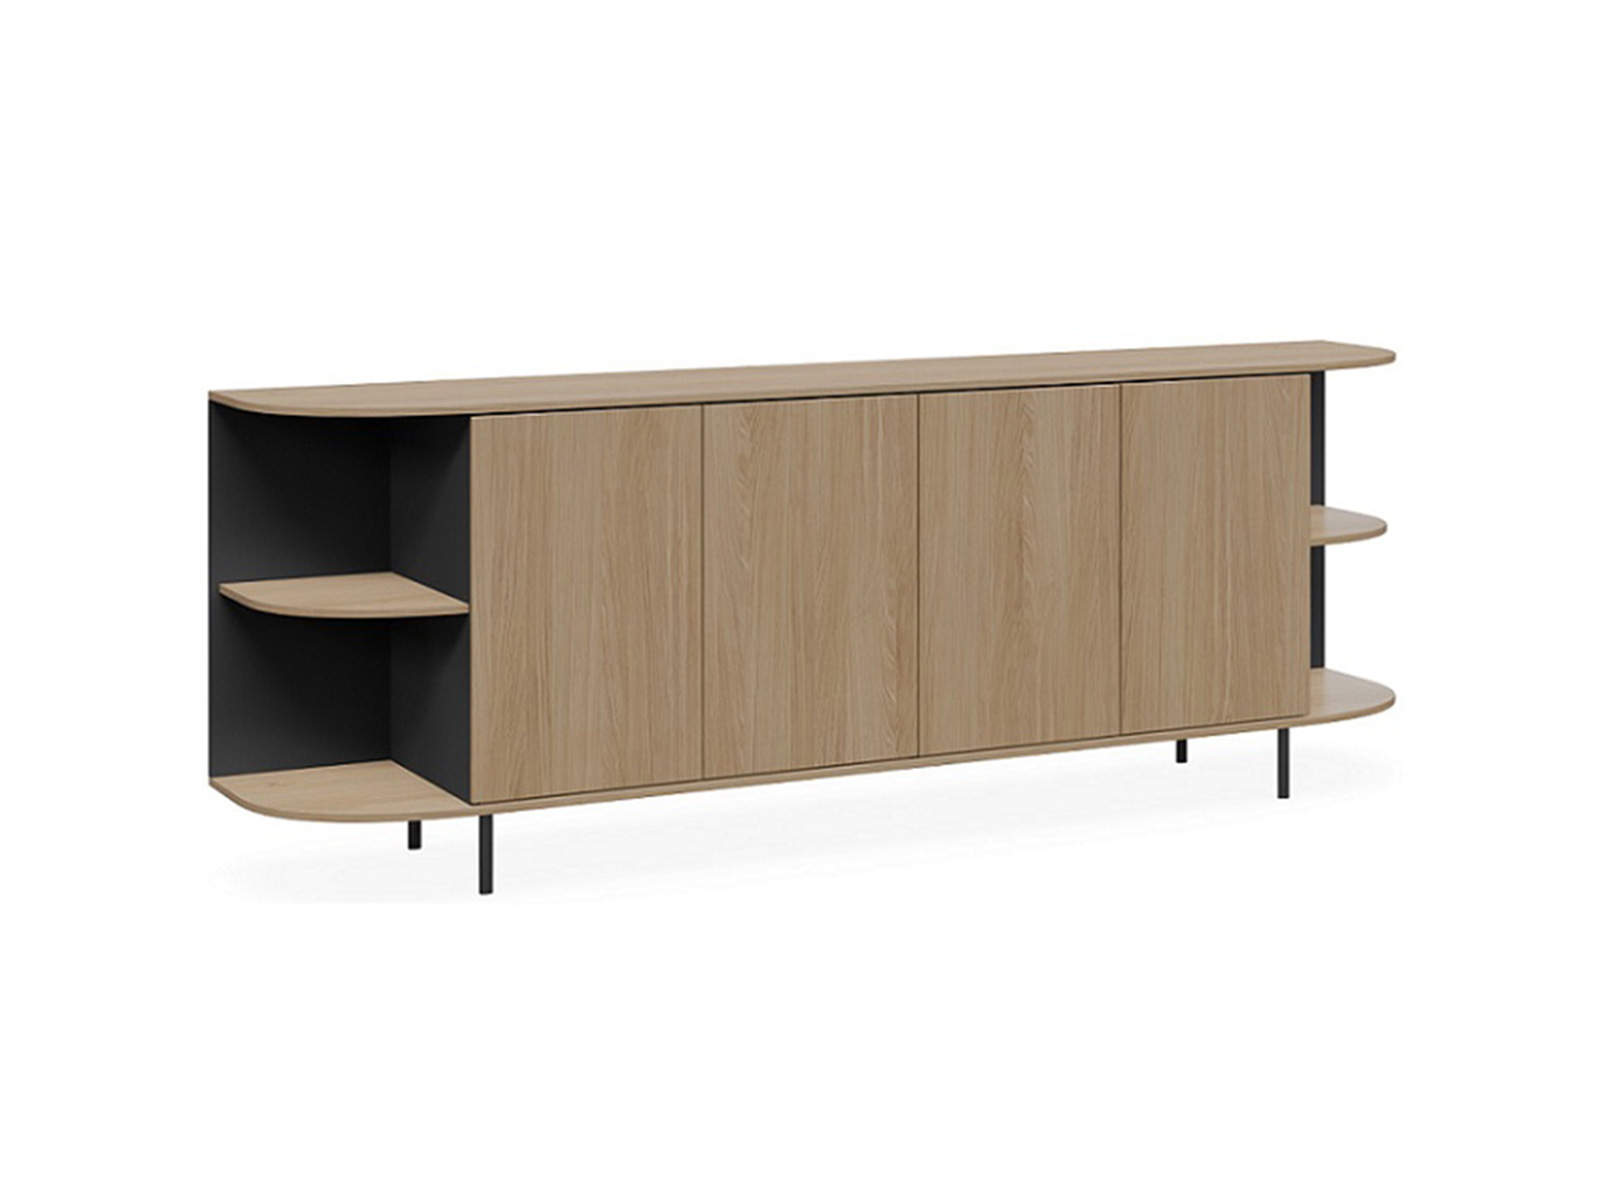 Mila Buffet Credenza in timber look with black accents